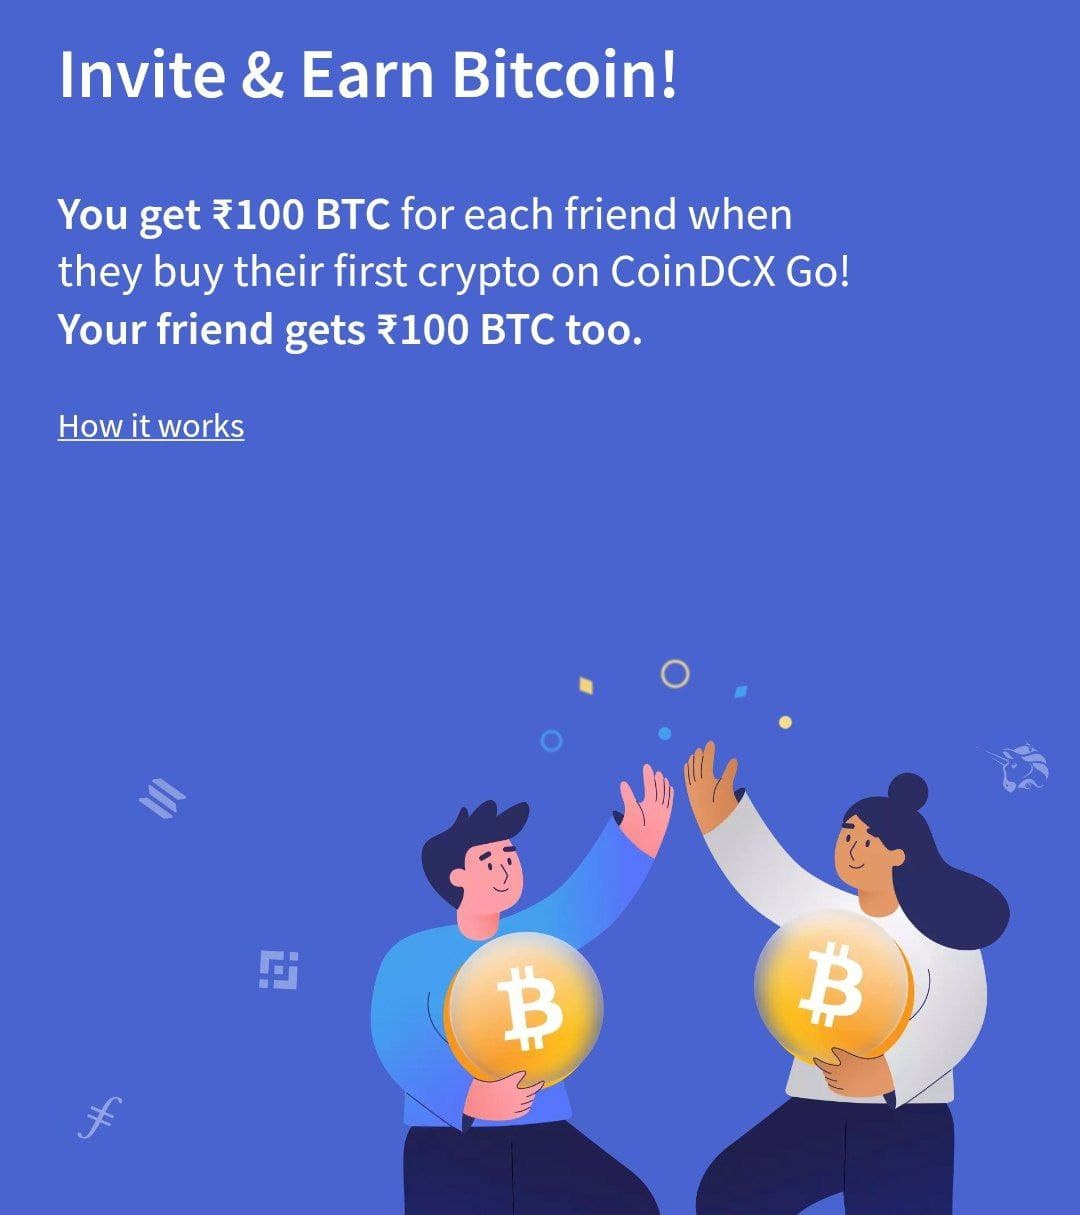 CoinDCX Go Free Bitcoin Offer Loot - ₹200 Bitcoins For ...